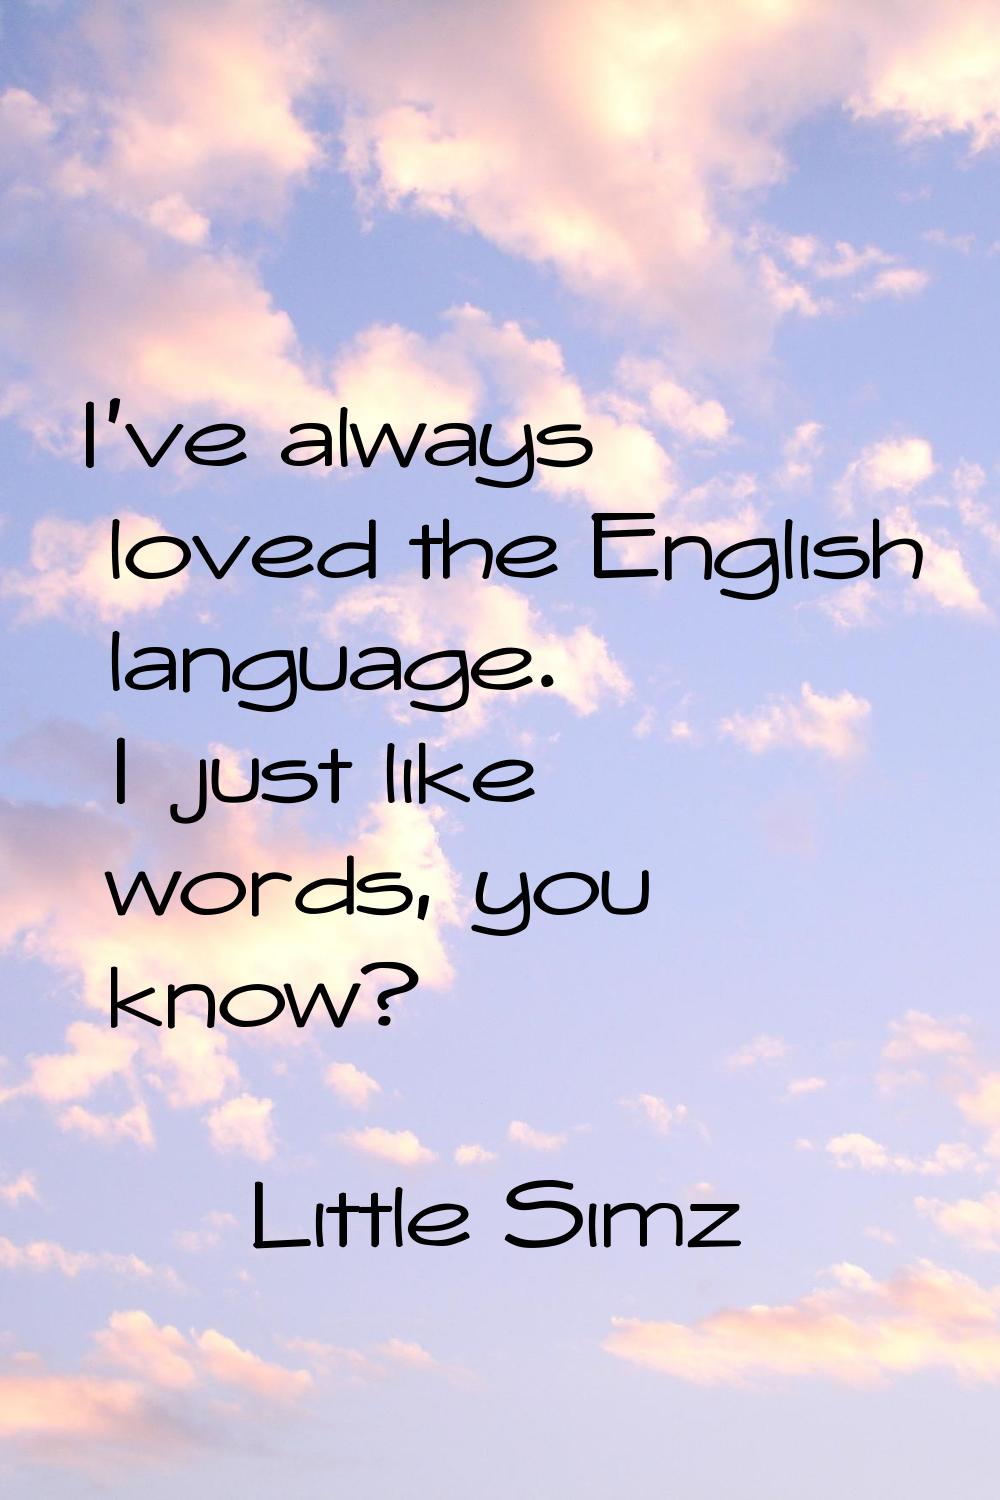 I've always loved the English language. I just like words, you know?